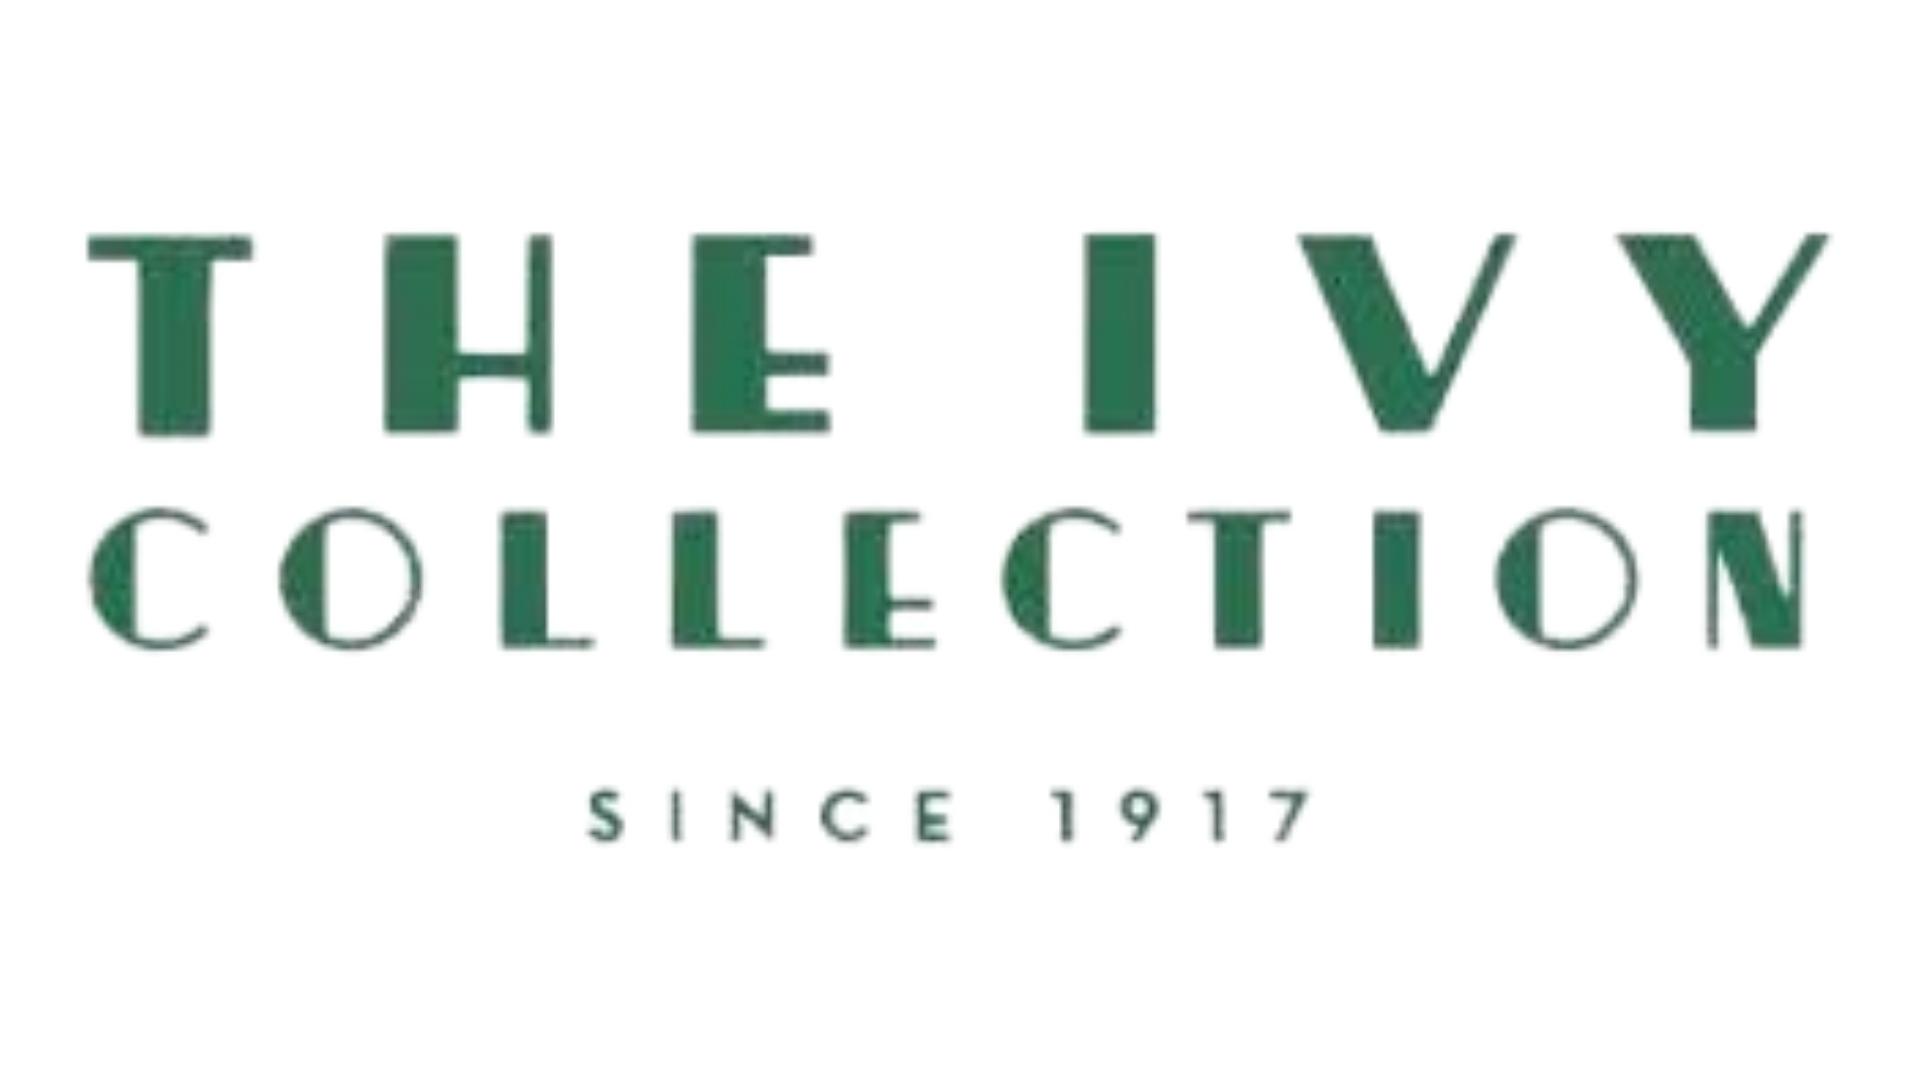 The Ivy Collection